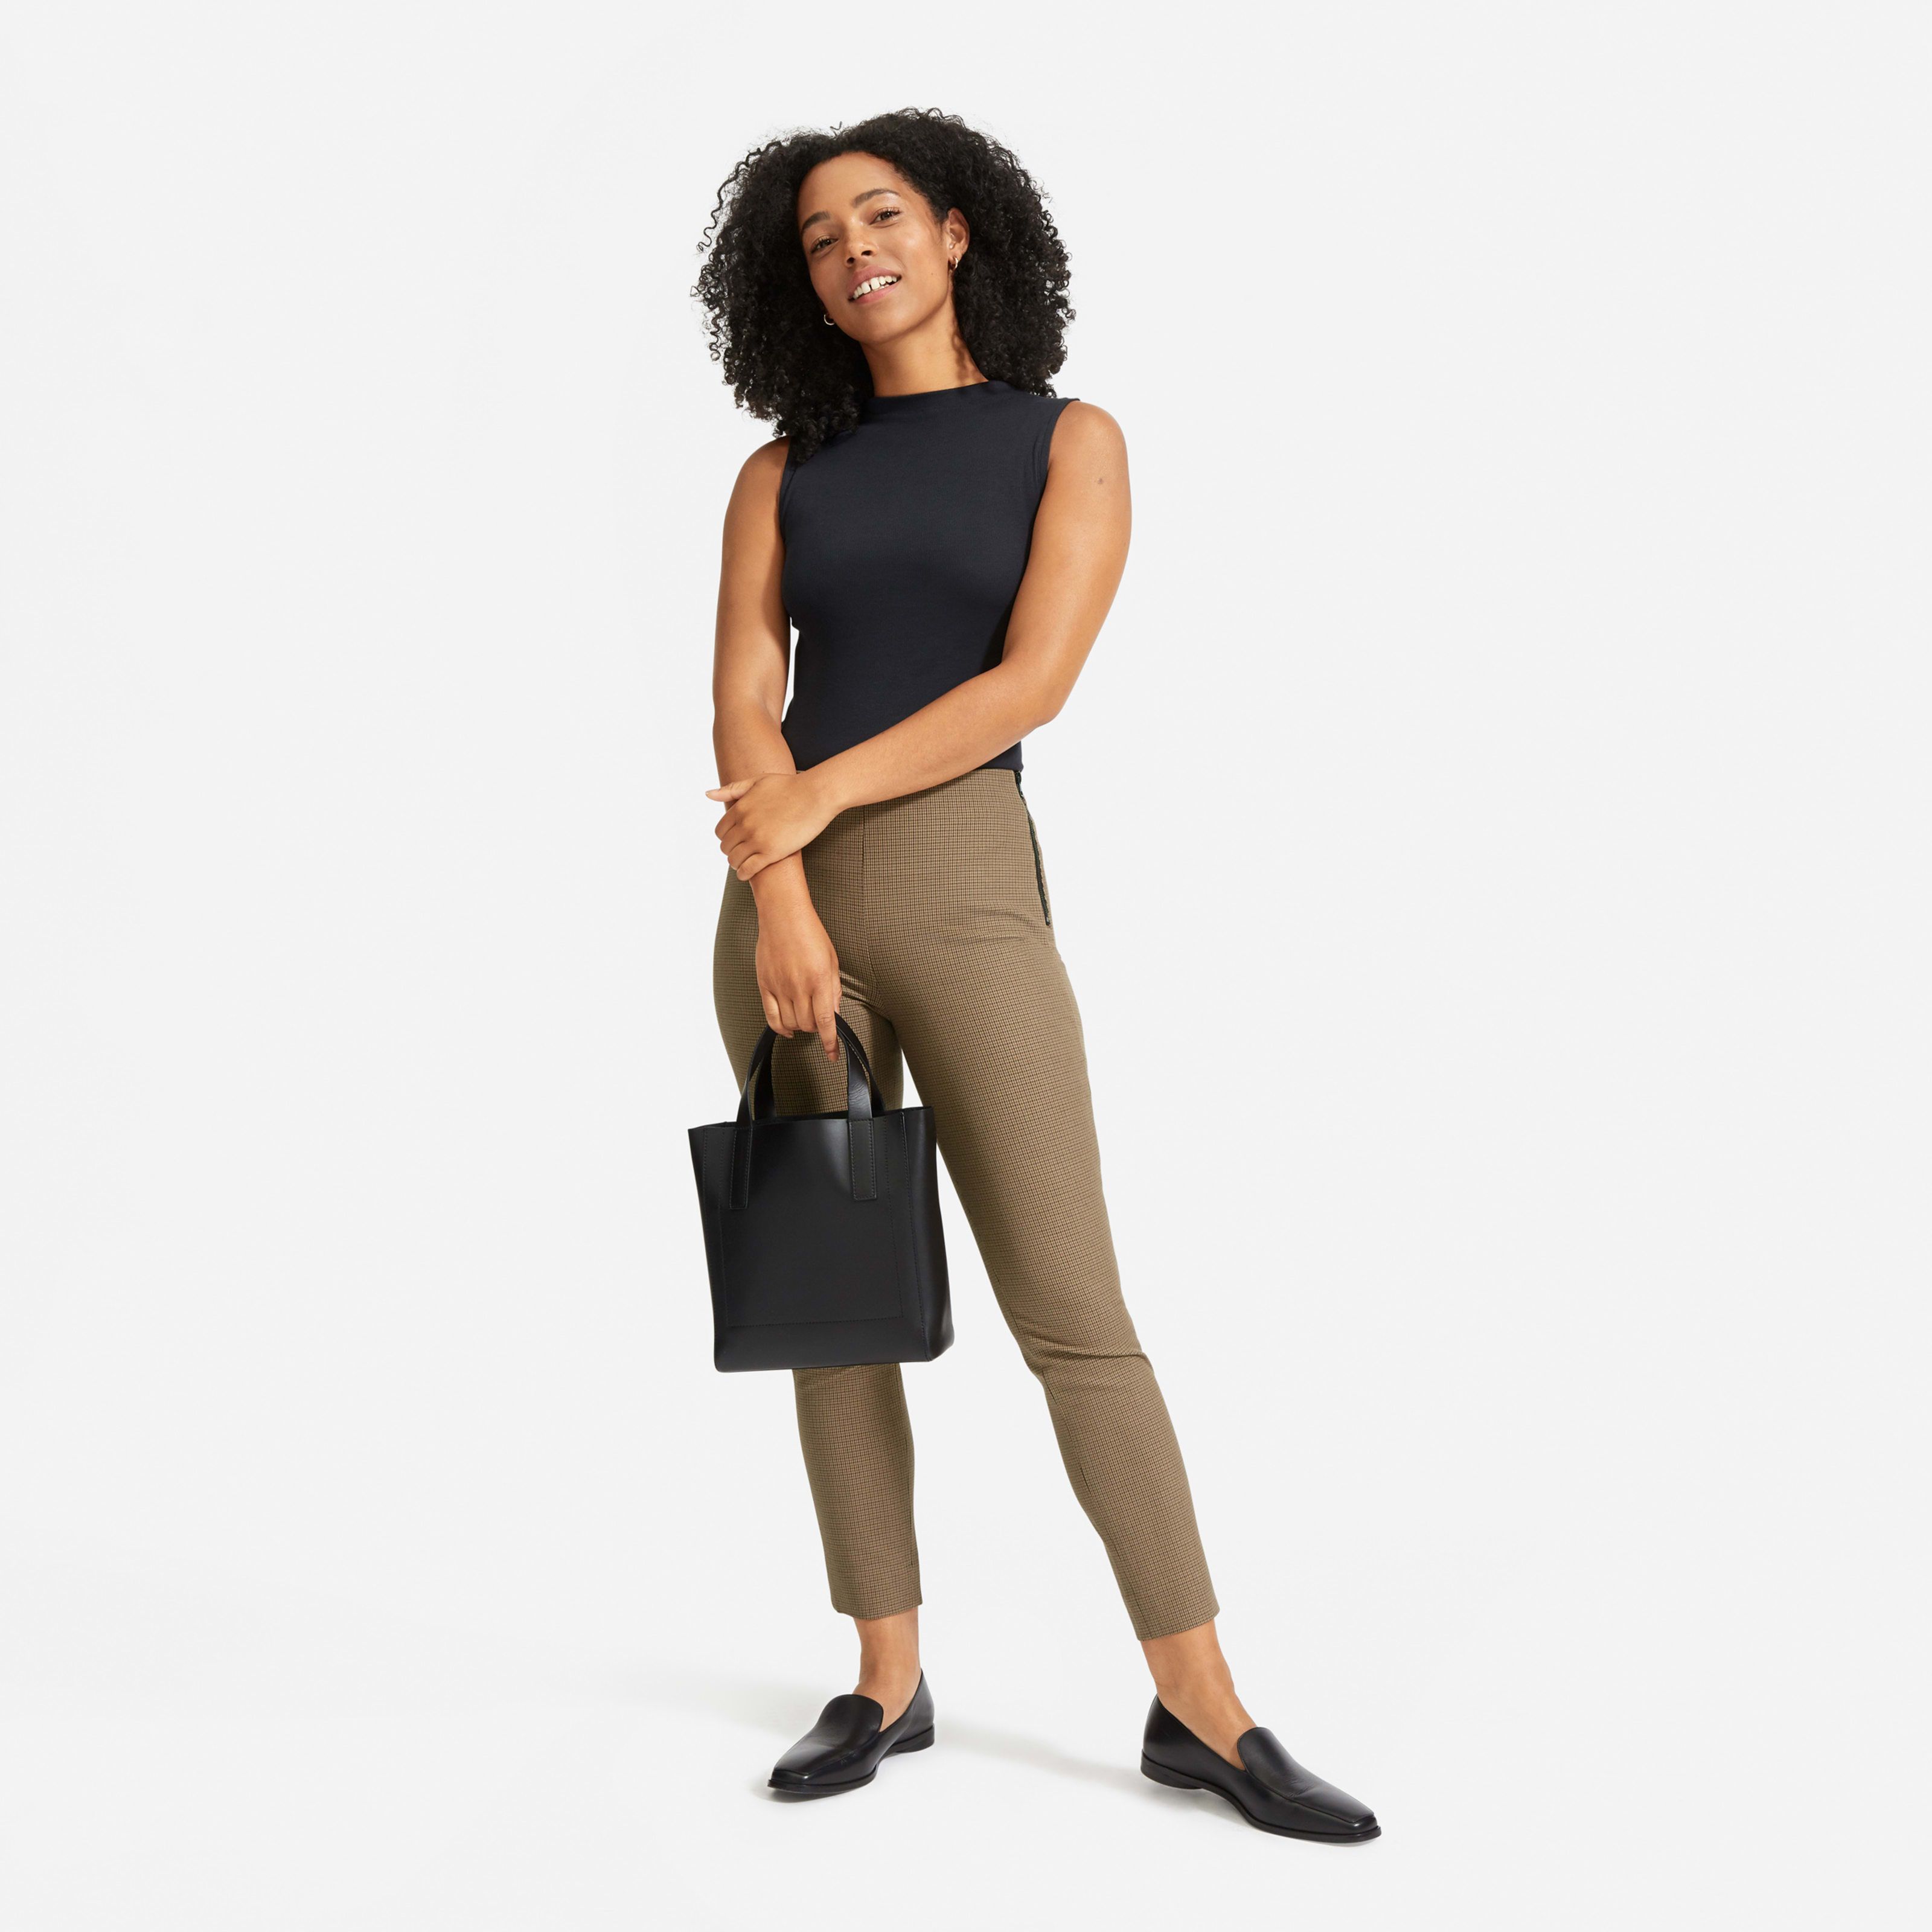 Women's Side-Zip Stretch Cotton Pant by Everlane in Cocoa Brown Houndstooth, Size 12 | Everlane